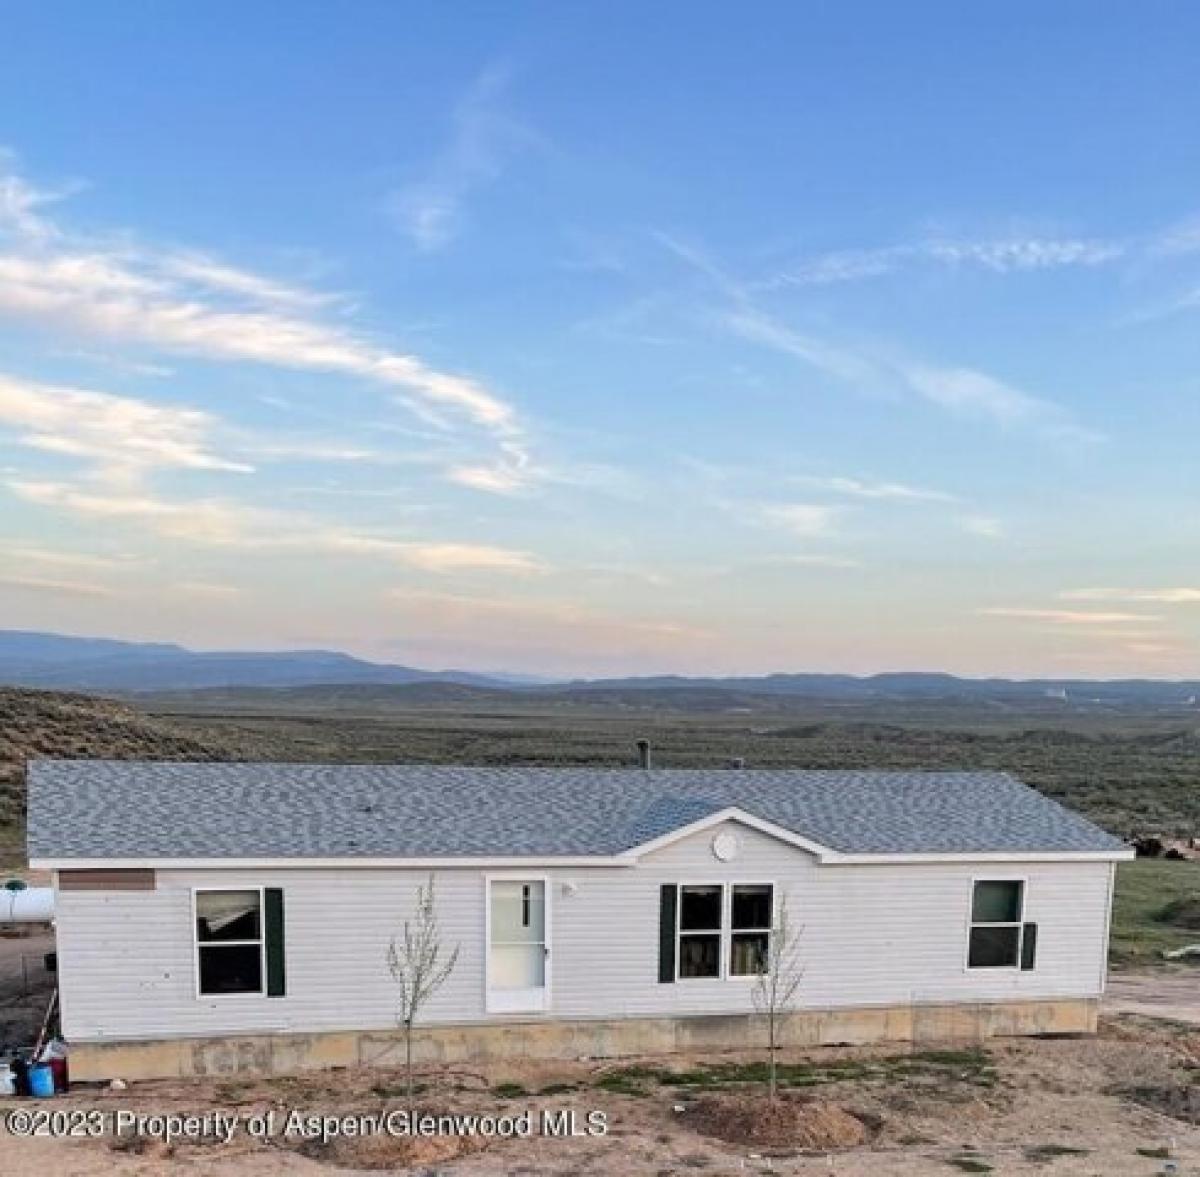 Picture of Home For Sale in Dinosaur, Colorado, United States